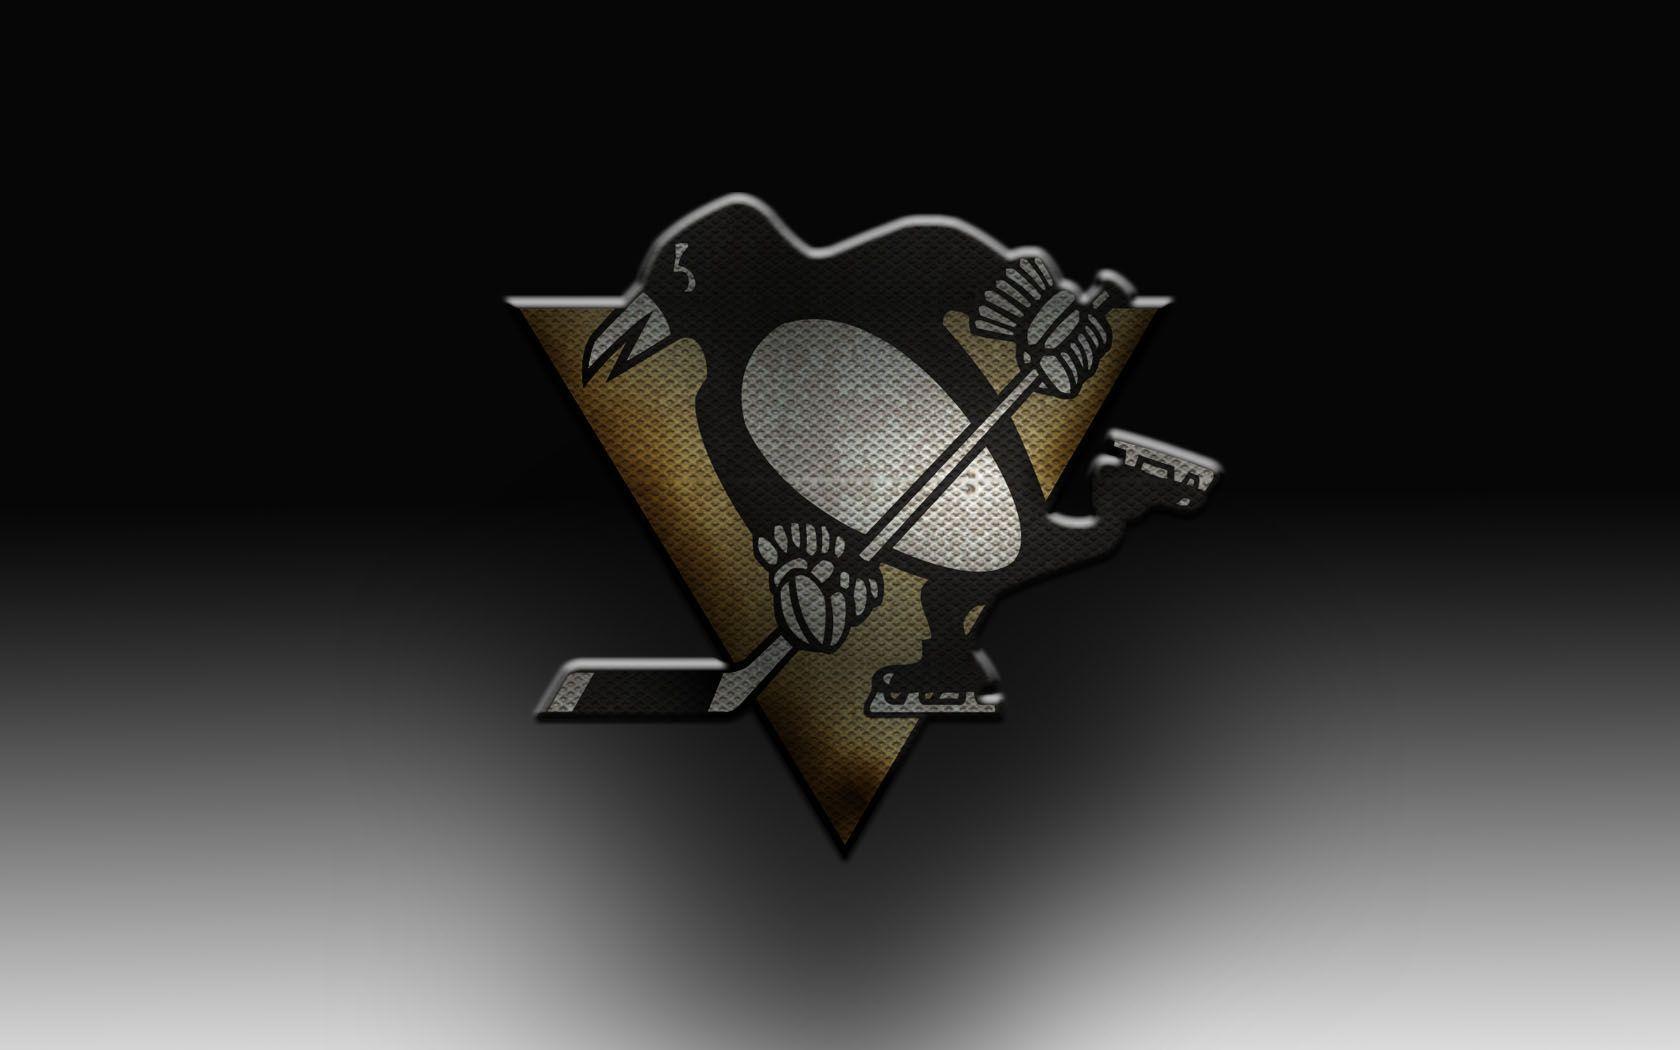 Pittsburgh Penguins wallpaper by woody6866  Download on ZEDGE  eac7